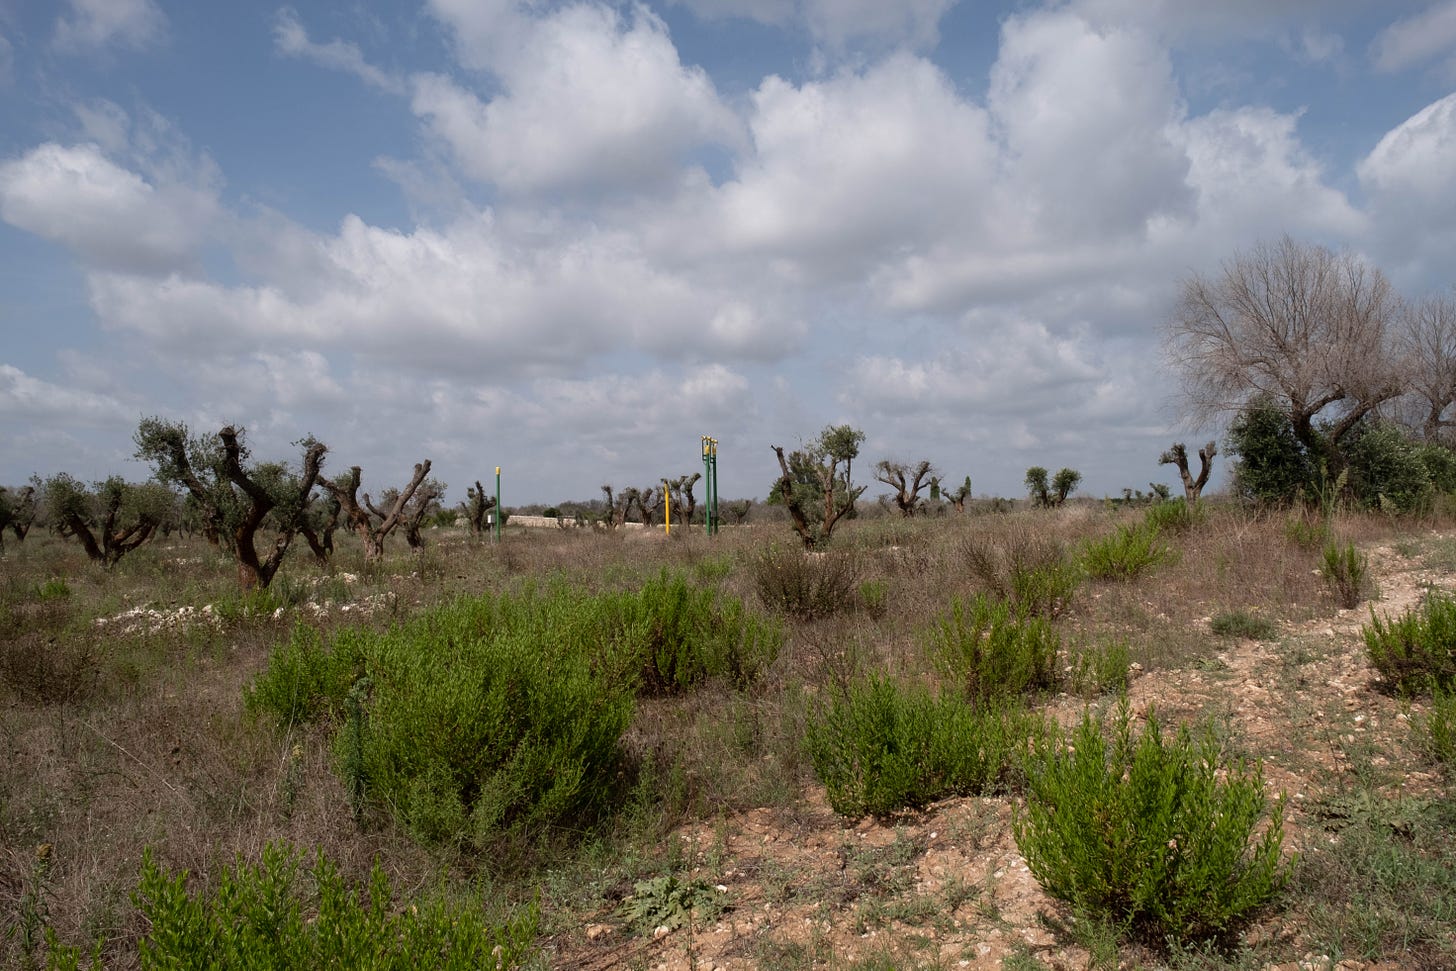 A cloudy blue sky hangs over a field of low shrub, knobby olive trees, and white and brown rock earth. In the distance, several green and yellow metal poles stand out among the natural scene.